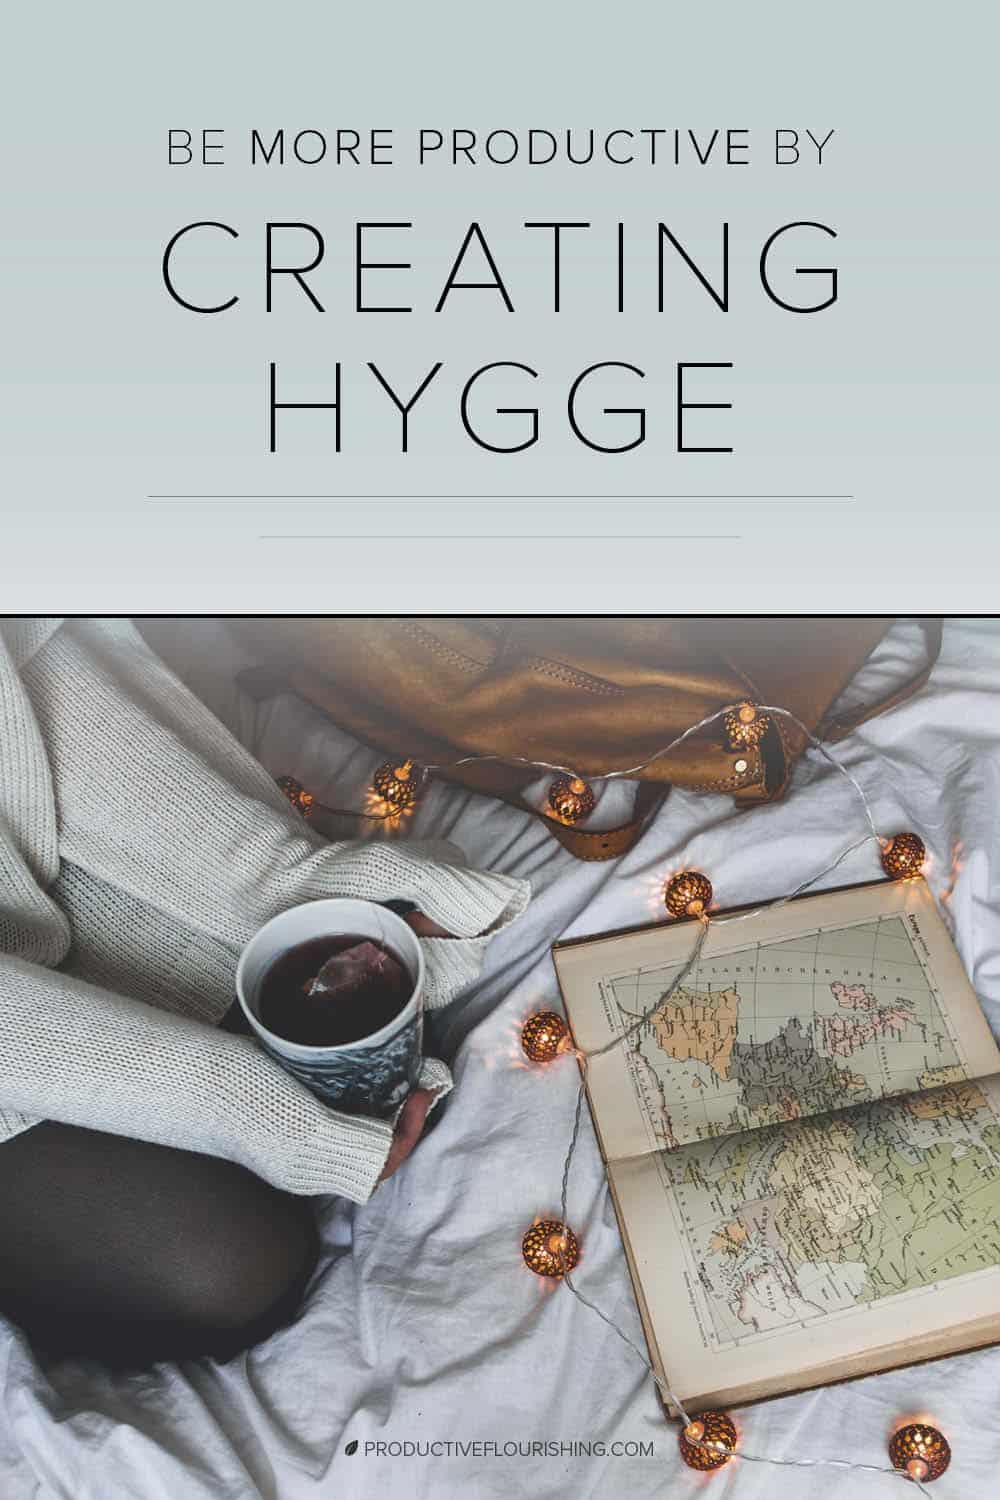 Try to experience this Hygge for yourself, and remember that the work you do need not be painful or a “grind.” By adding some Hygge into your work, you can find more joy in what you’re doing and become more productive in your business. #hygge #businessproductivity #productiveflourishing